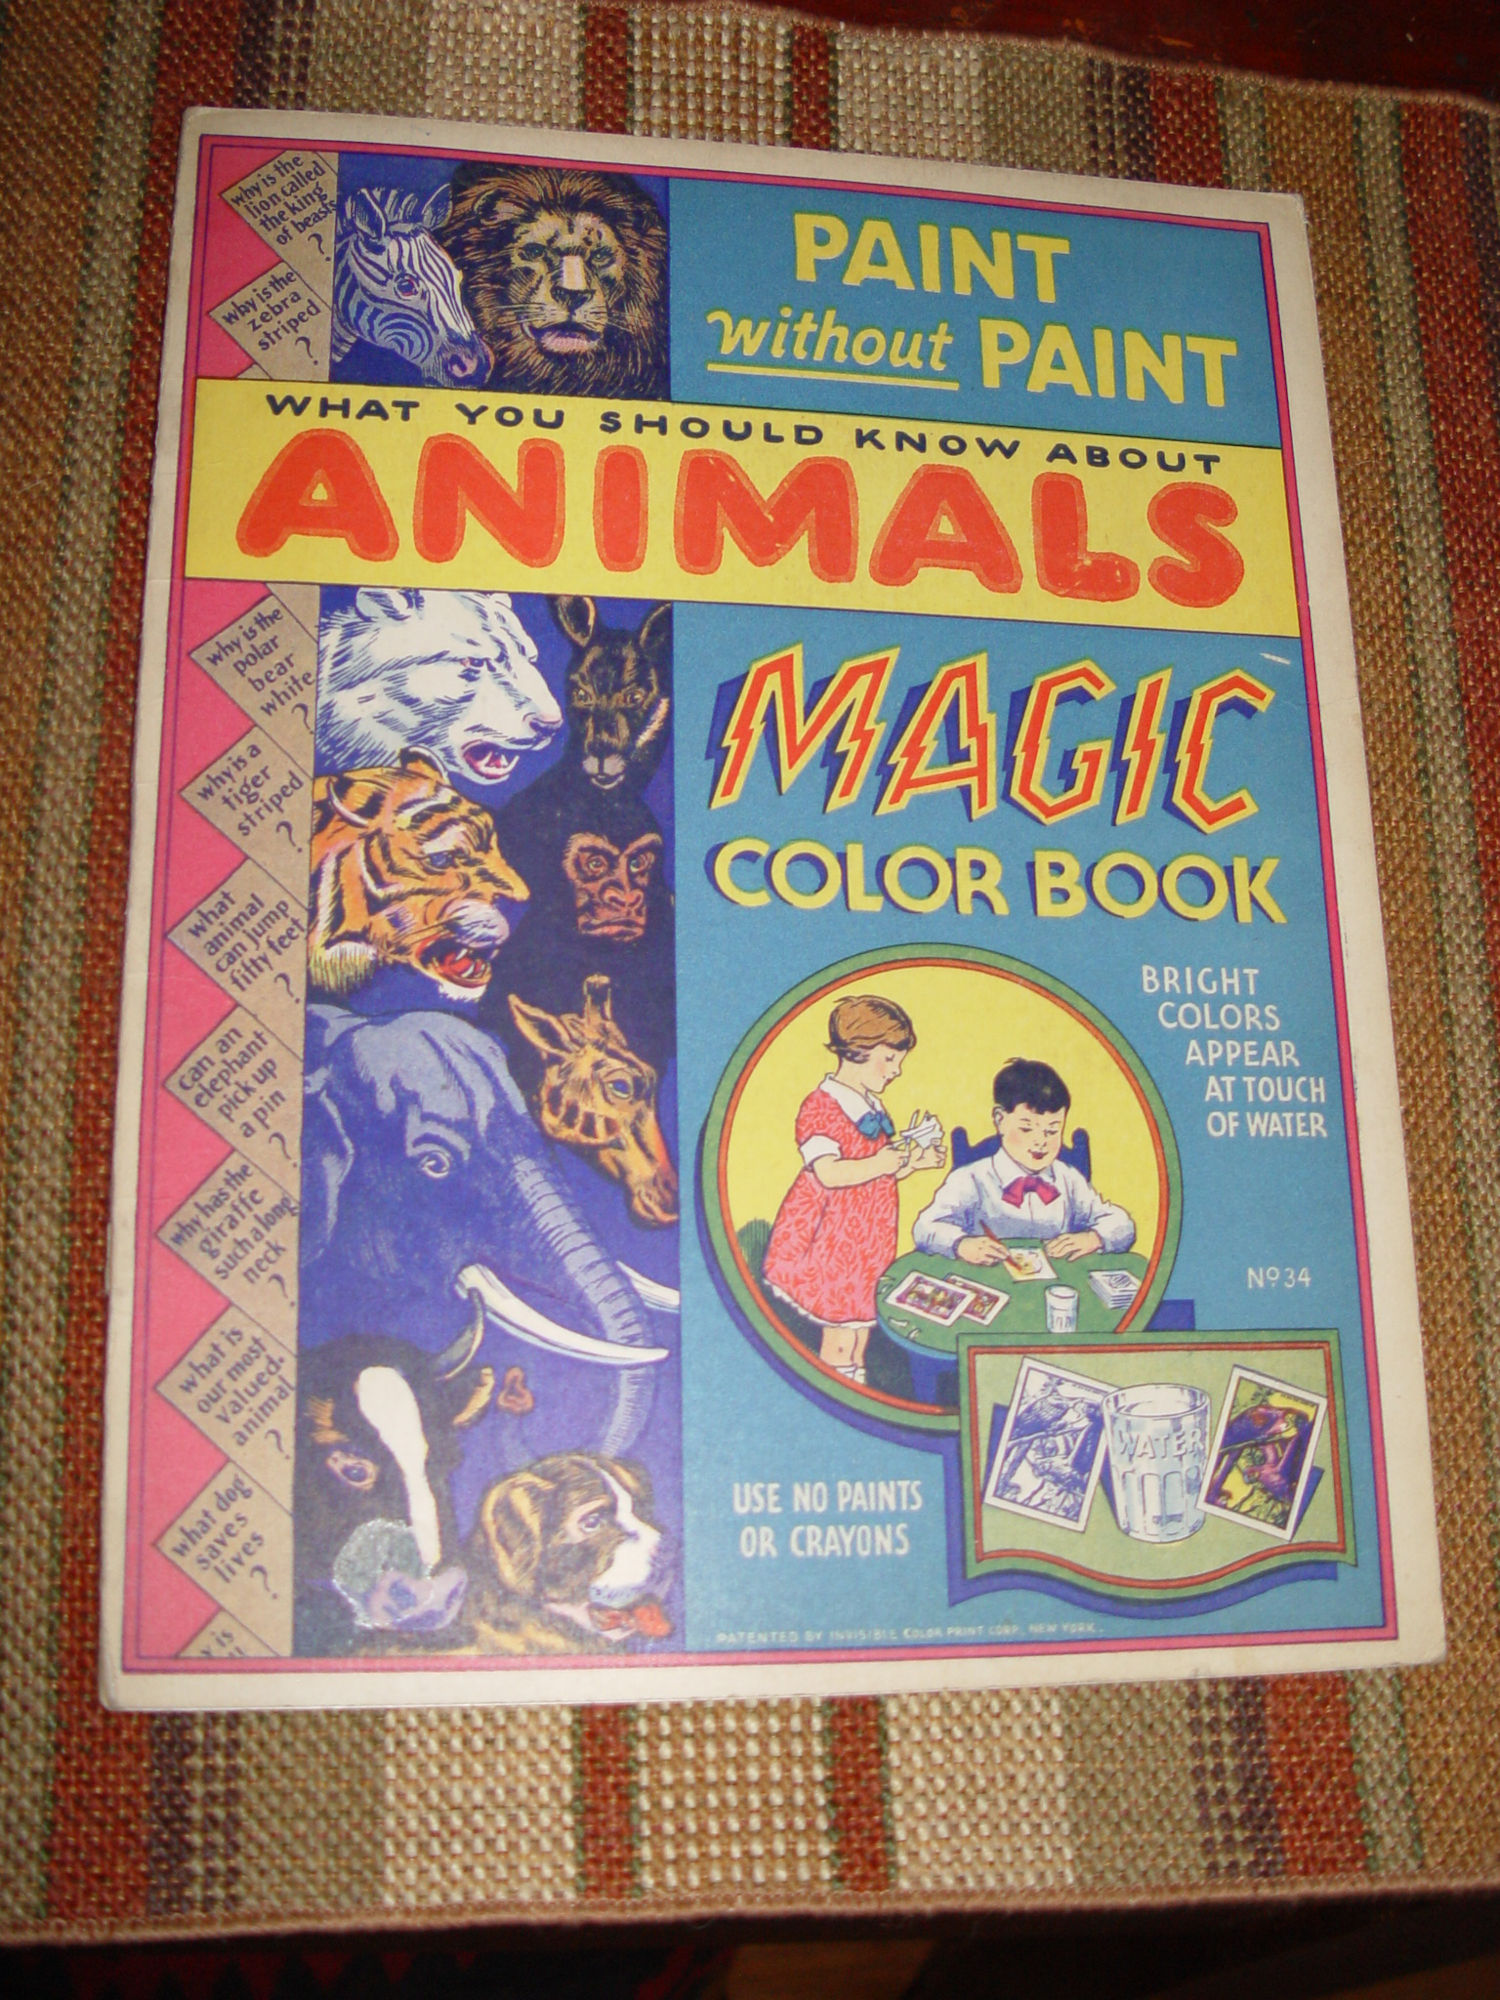 Rare Paint Without Paint Magic Color Book;
                        1932 Graphic Animals